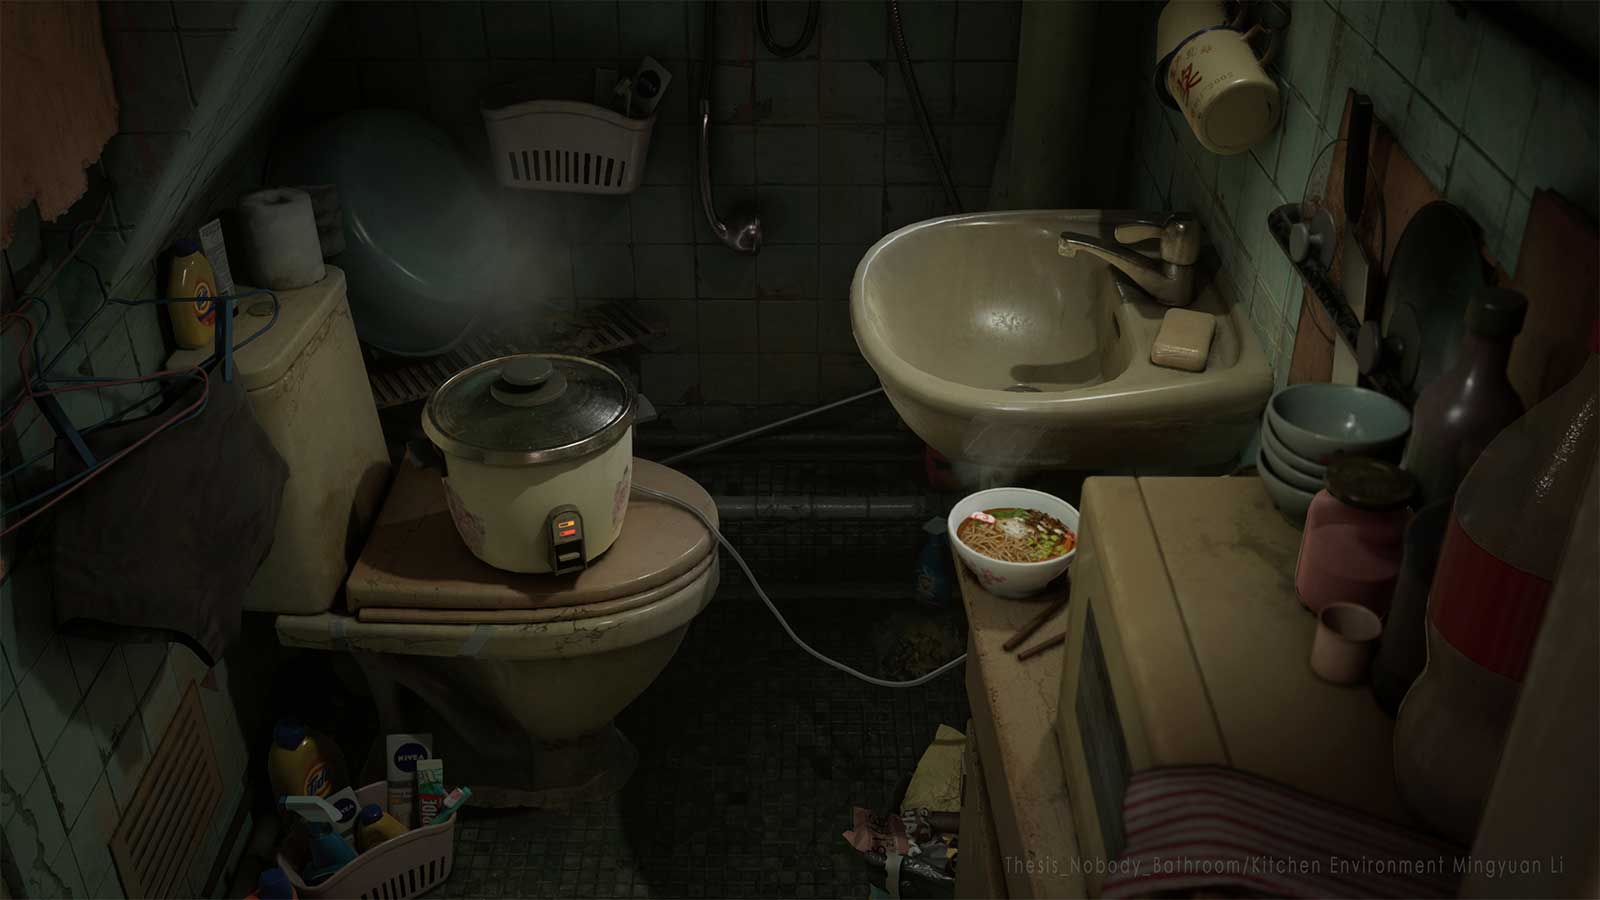 A cramped bathroom that also contains kitchen related items.